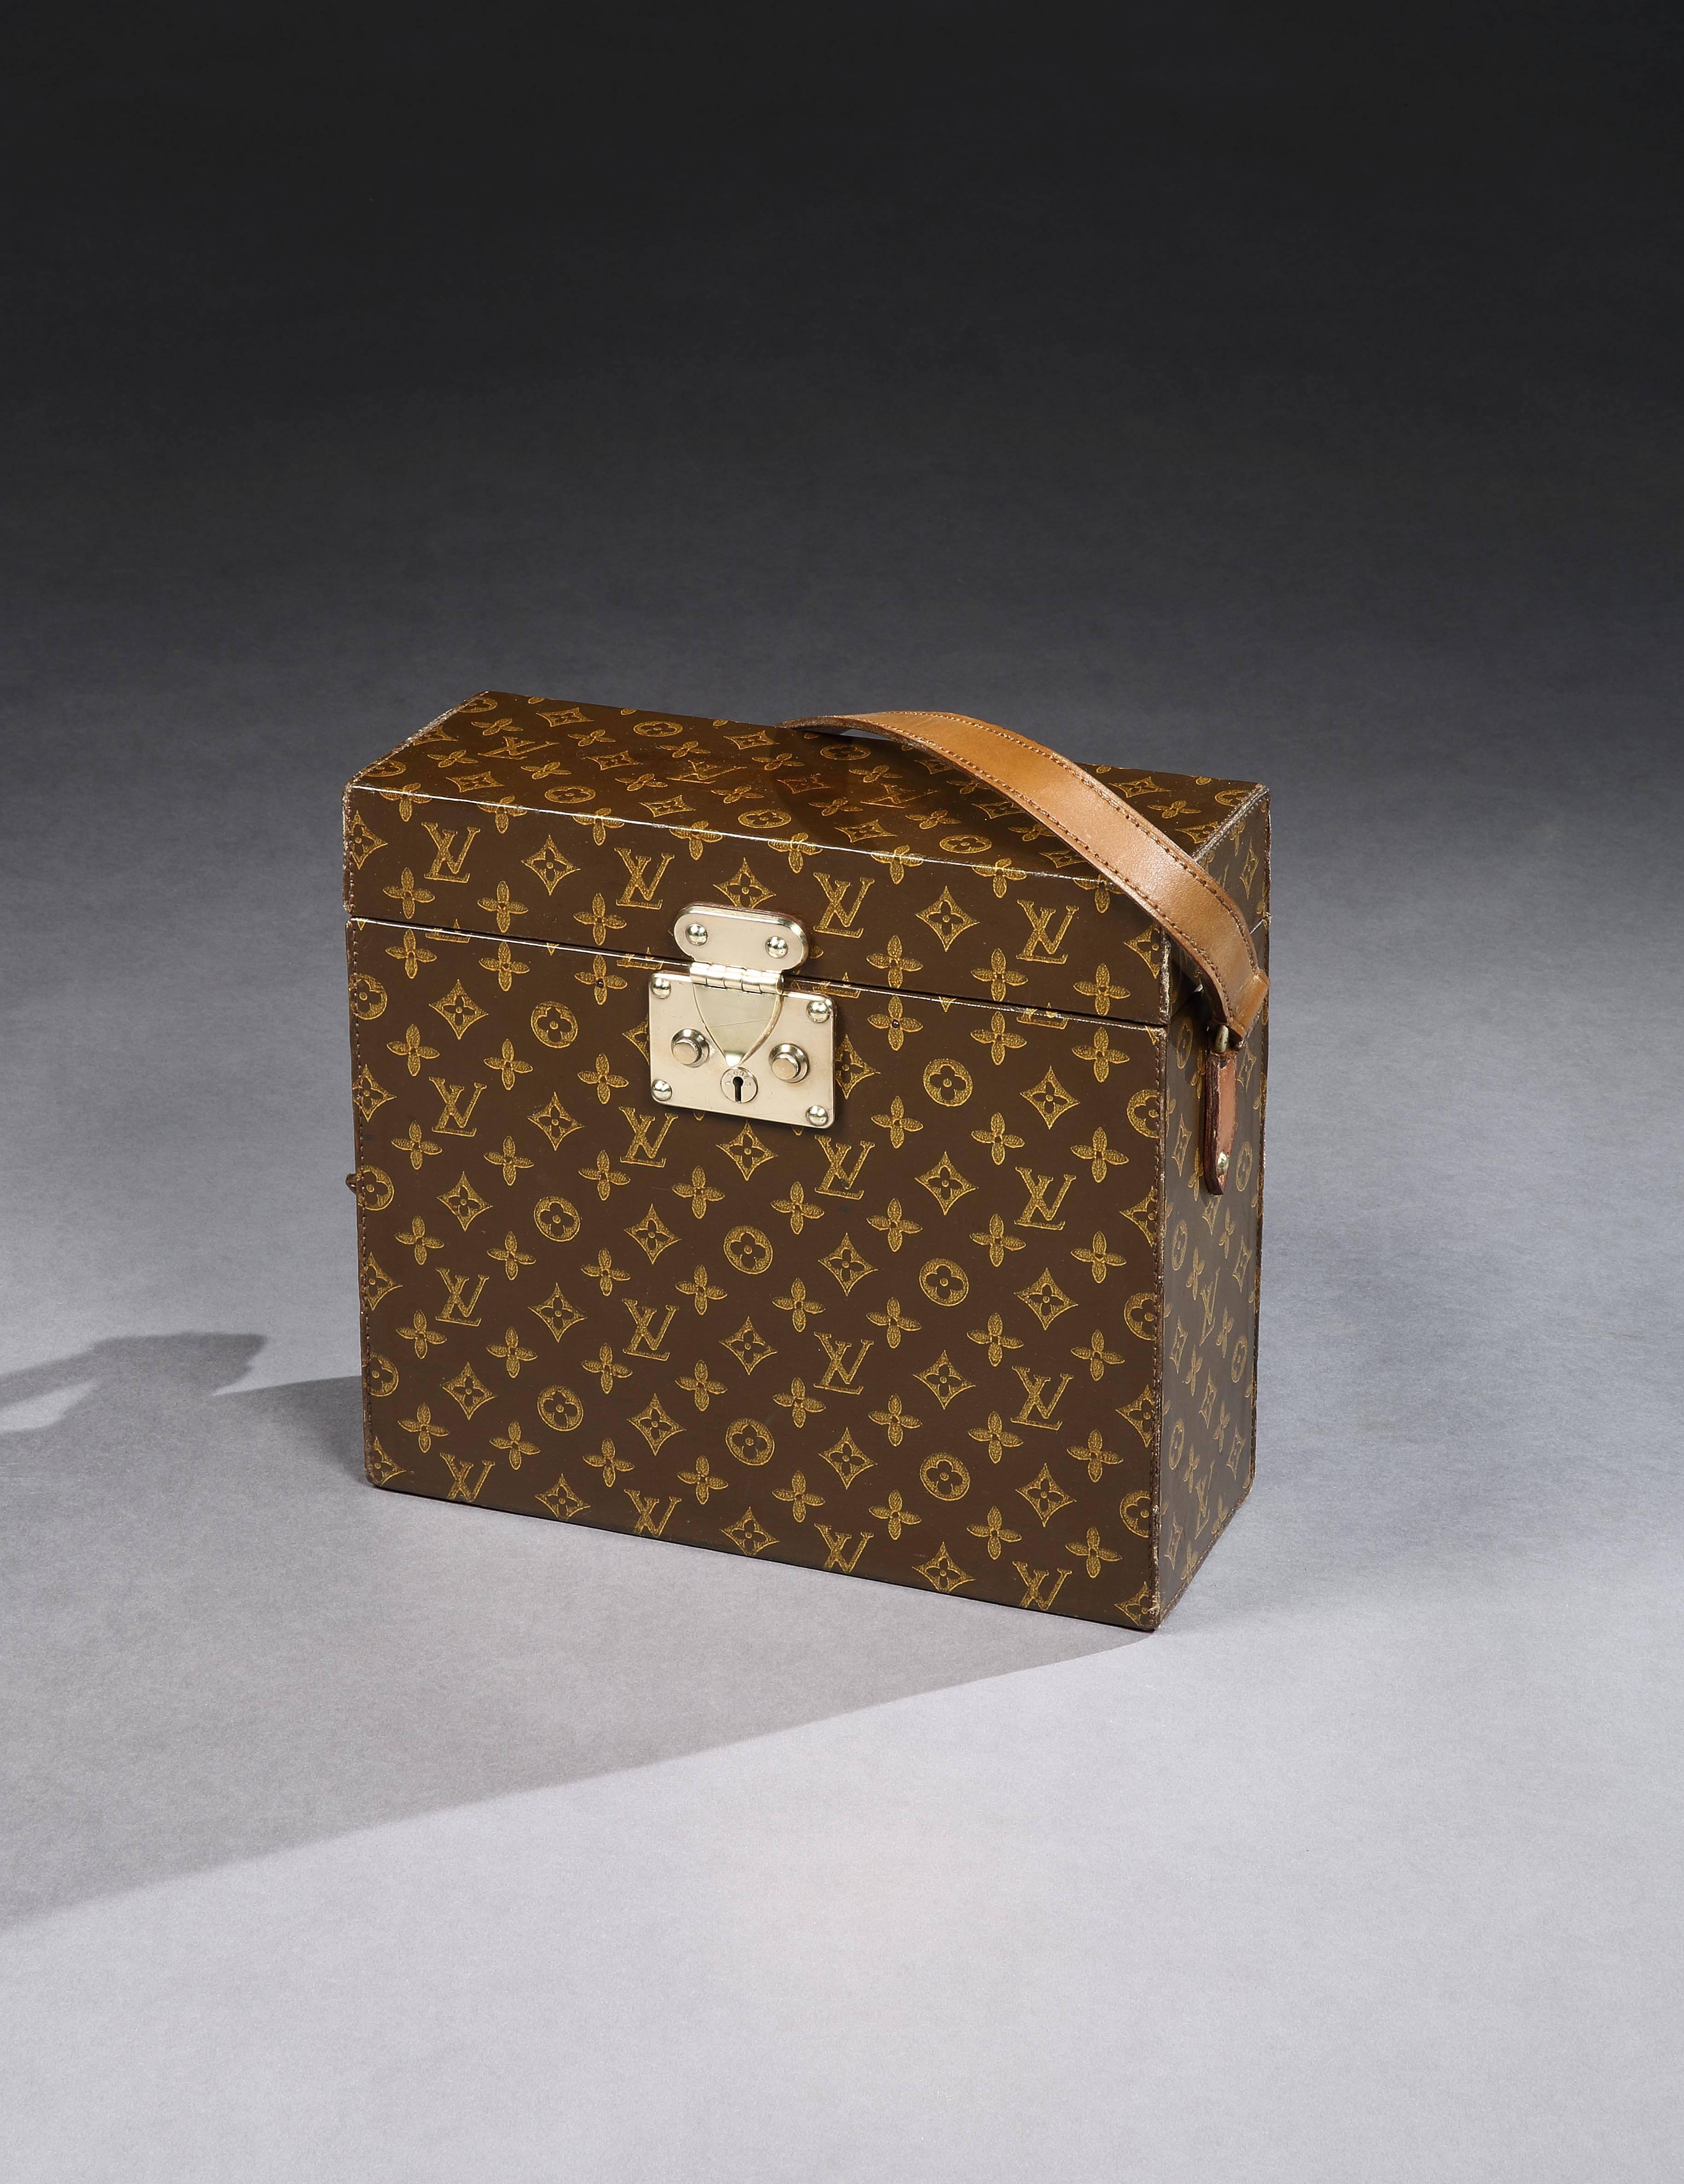 A rare special-order Louis Vuitton wine bottle carrier in the Classic LV ‘Monogramme’ pattern canvas, the hinged lid lifting open to reveal dividers for holding three wine bottles, and a special spring-loaded compartment perfect for a ‘waiter’s